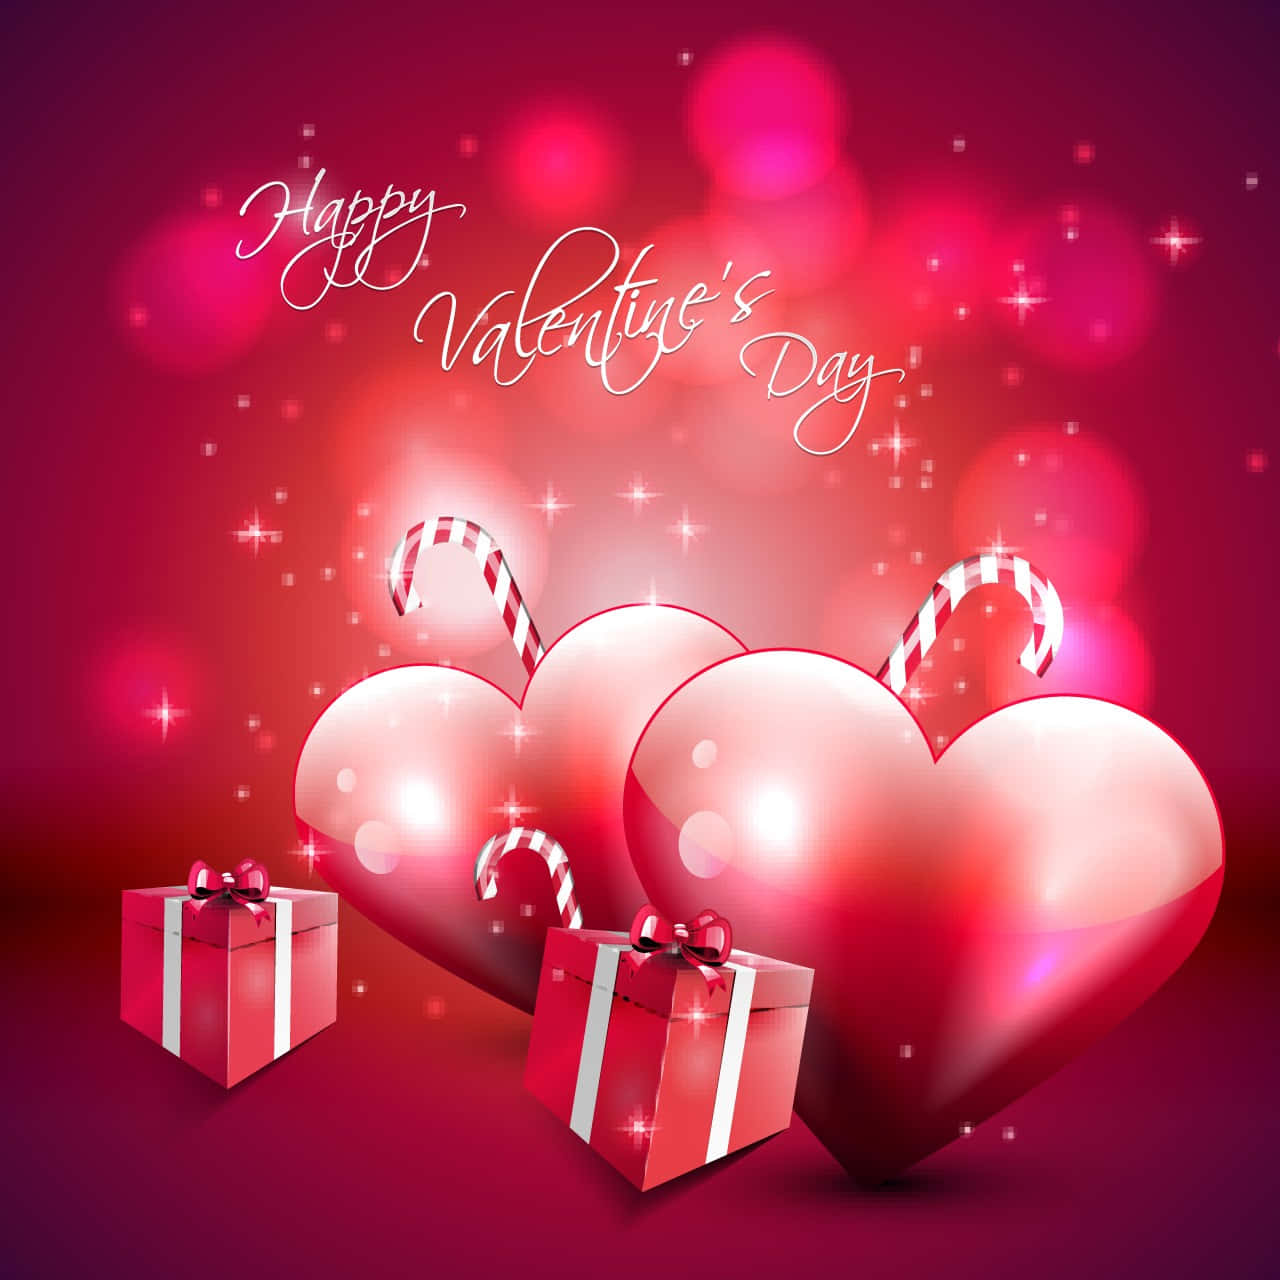 Red Cute Valentines Day Illustration Wallpaper